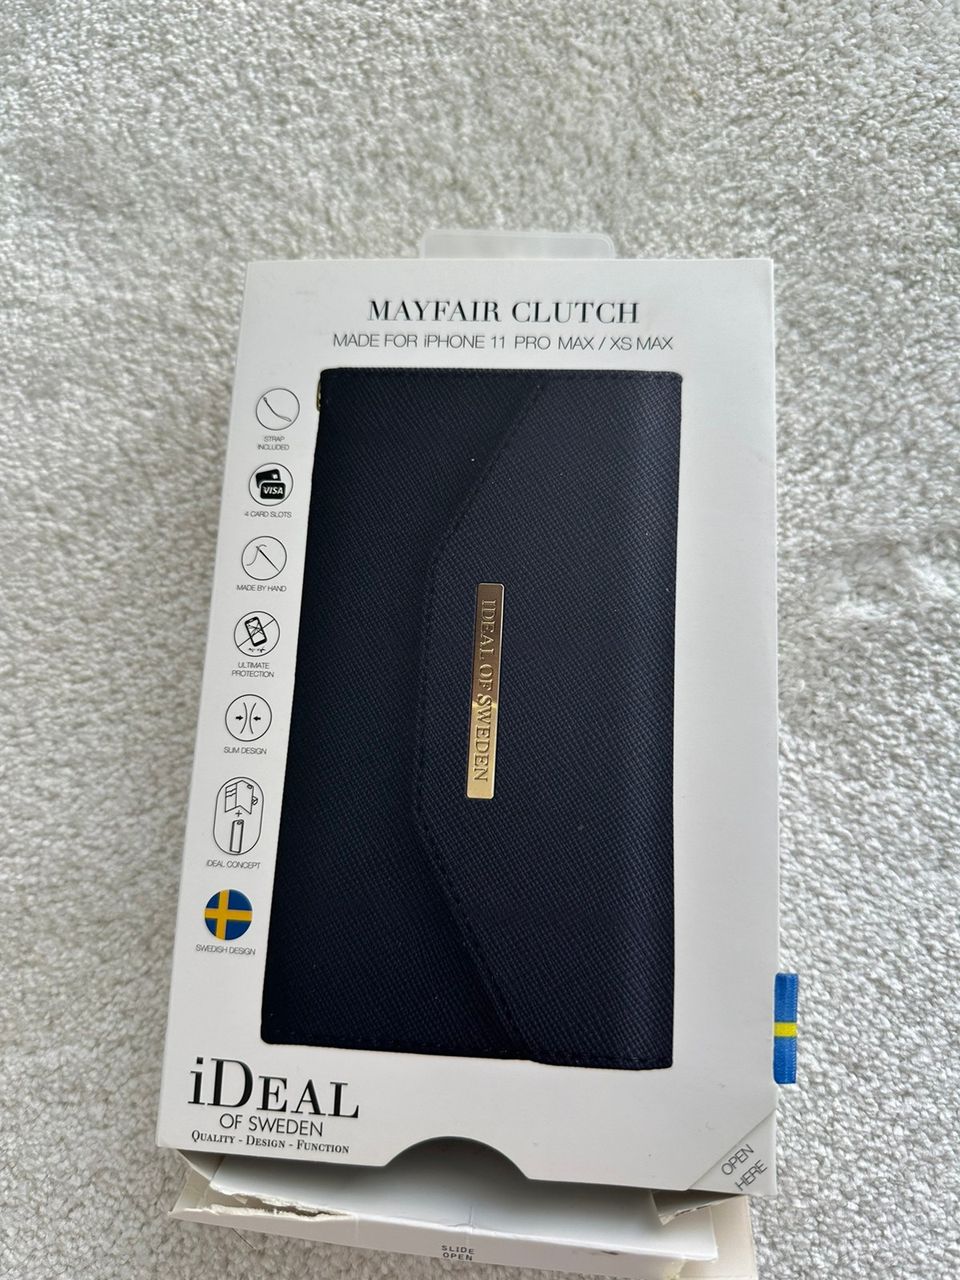 Ideal of sweden Iphone 11 Pro Max